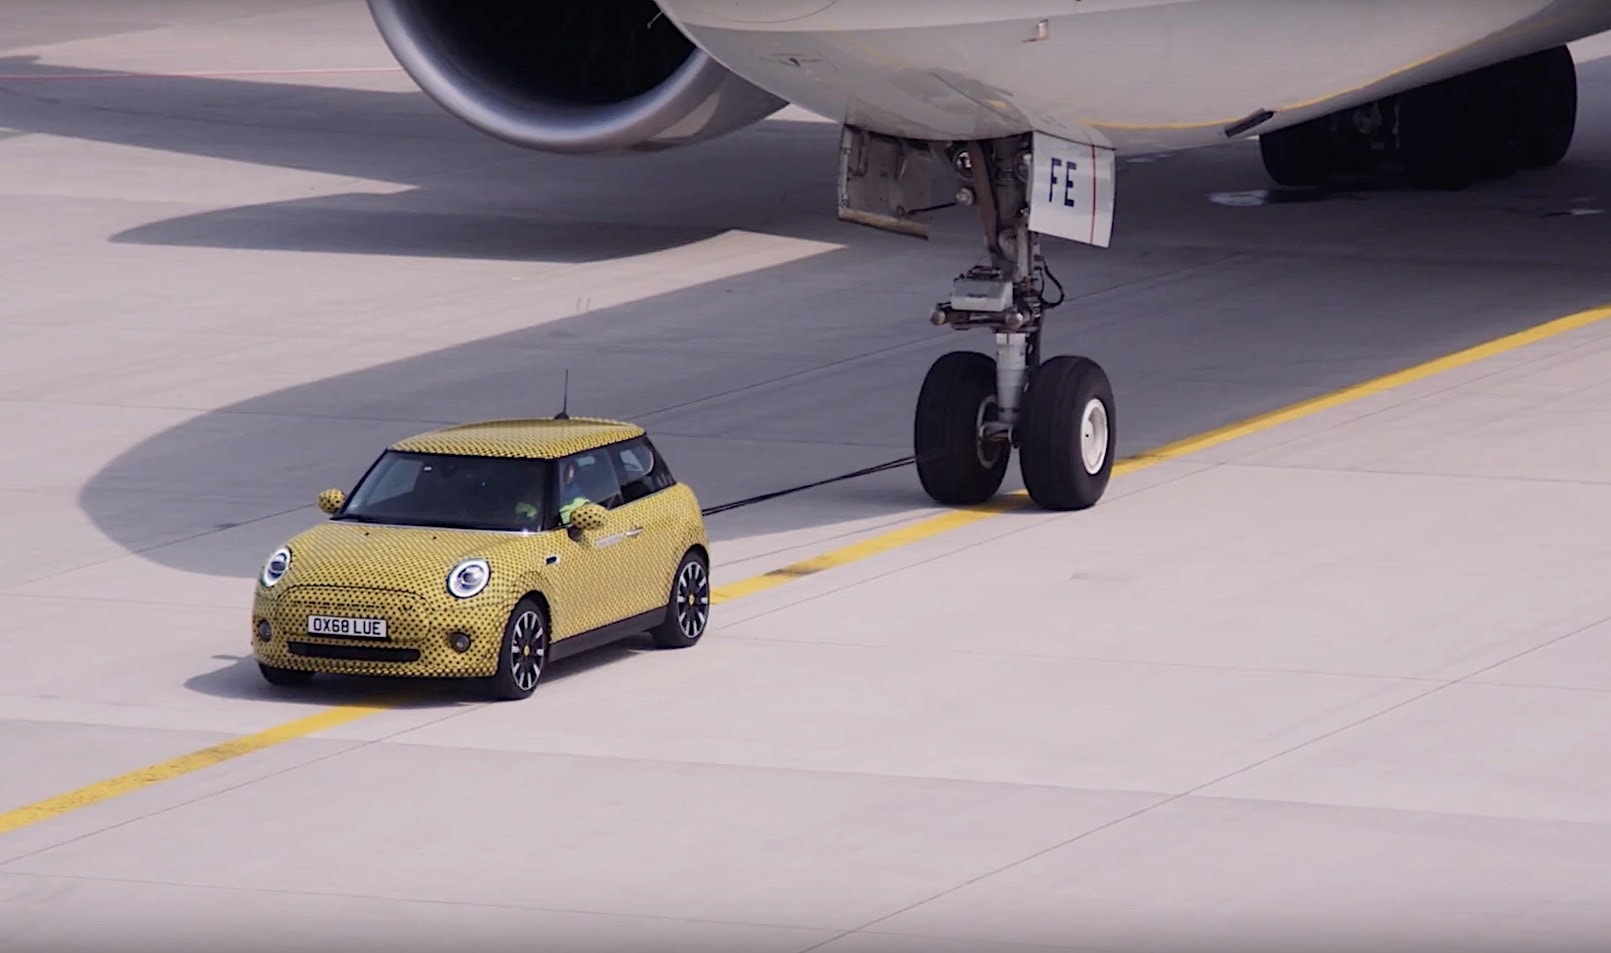 https://s1.cdn.autoevolution.com/images/news/2020-mini-cooper-se-flexes-muscles-and-tows-a-boeing-777f-down-a-runway-134908_1.jpg